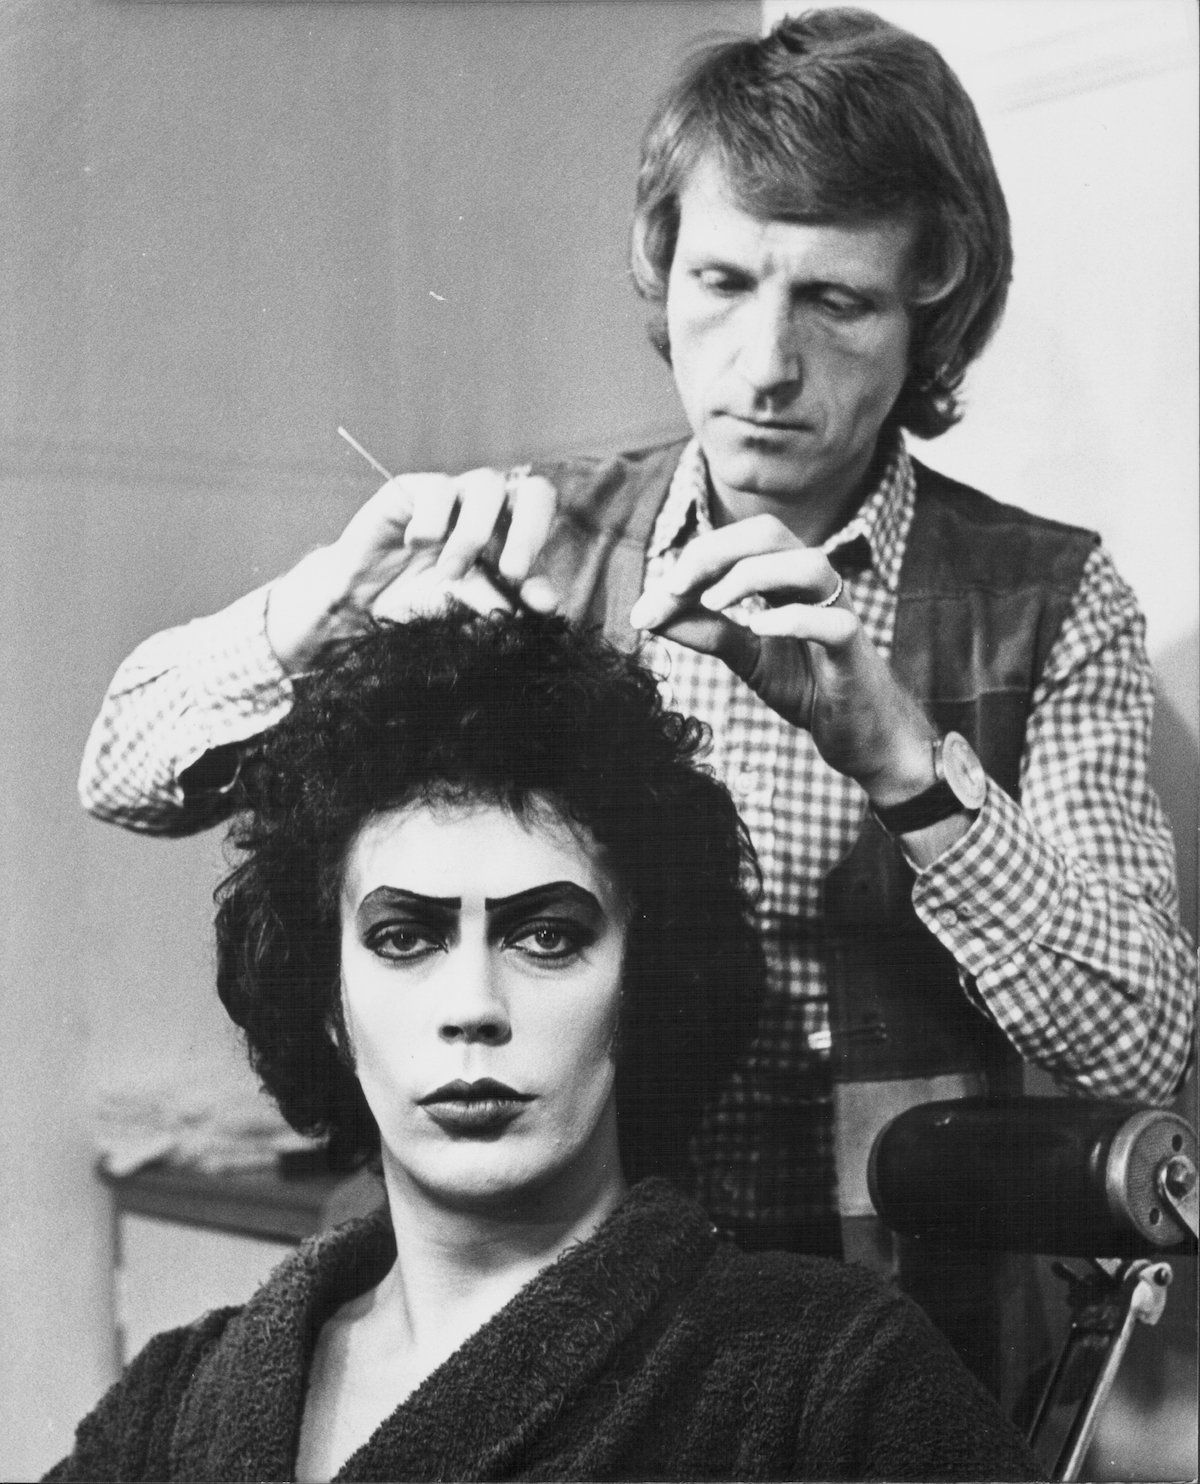 Time Curry in the makeup chair for 'The Rocky Horror Picture Show'